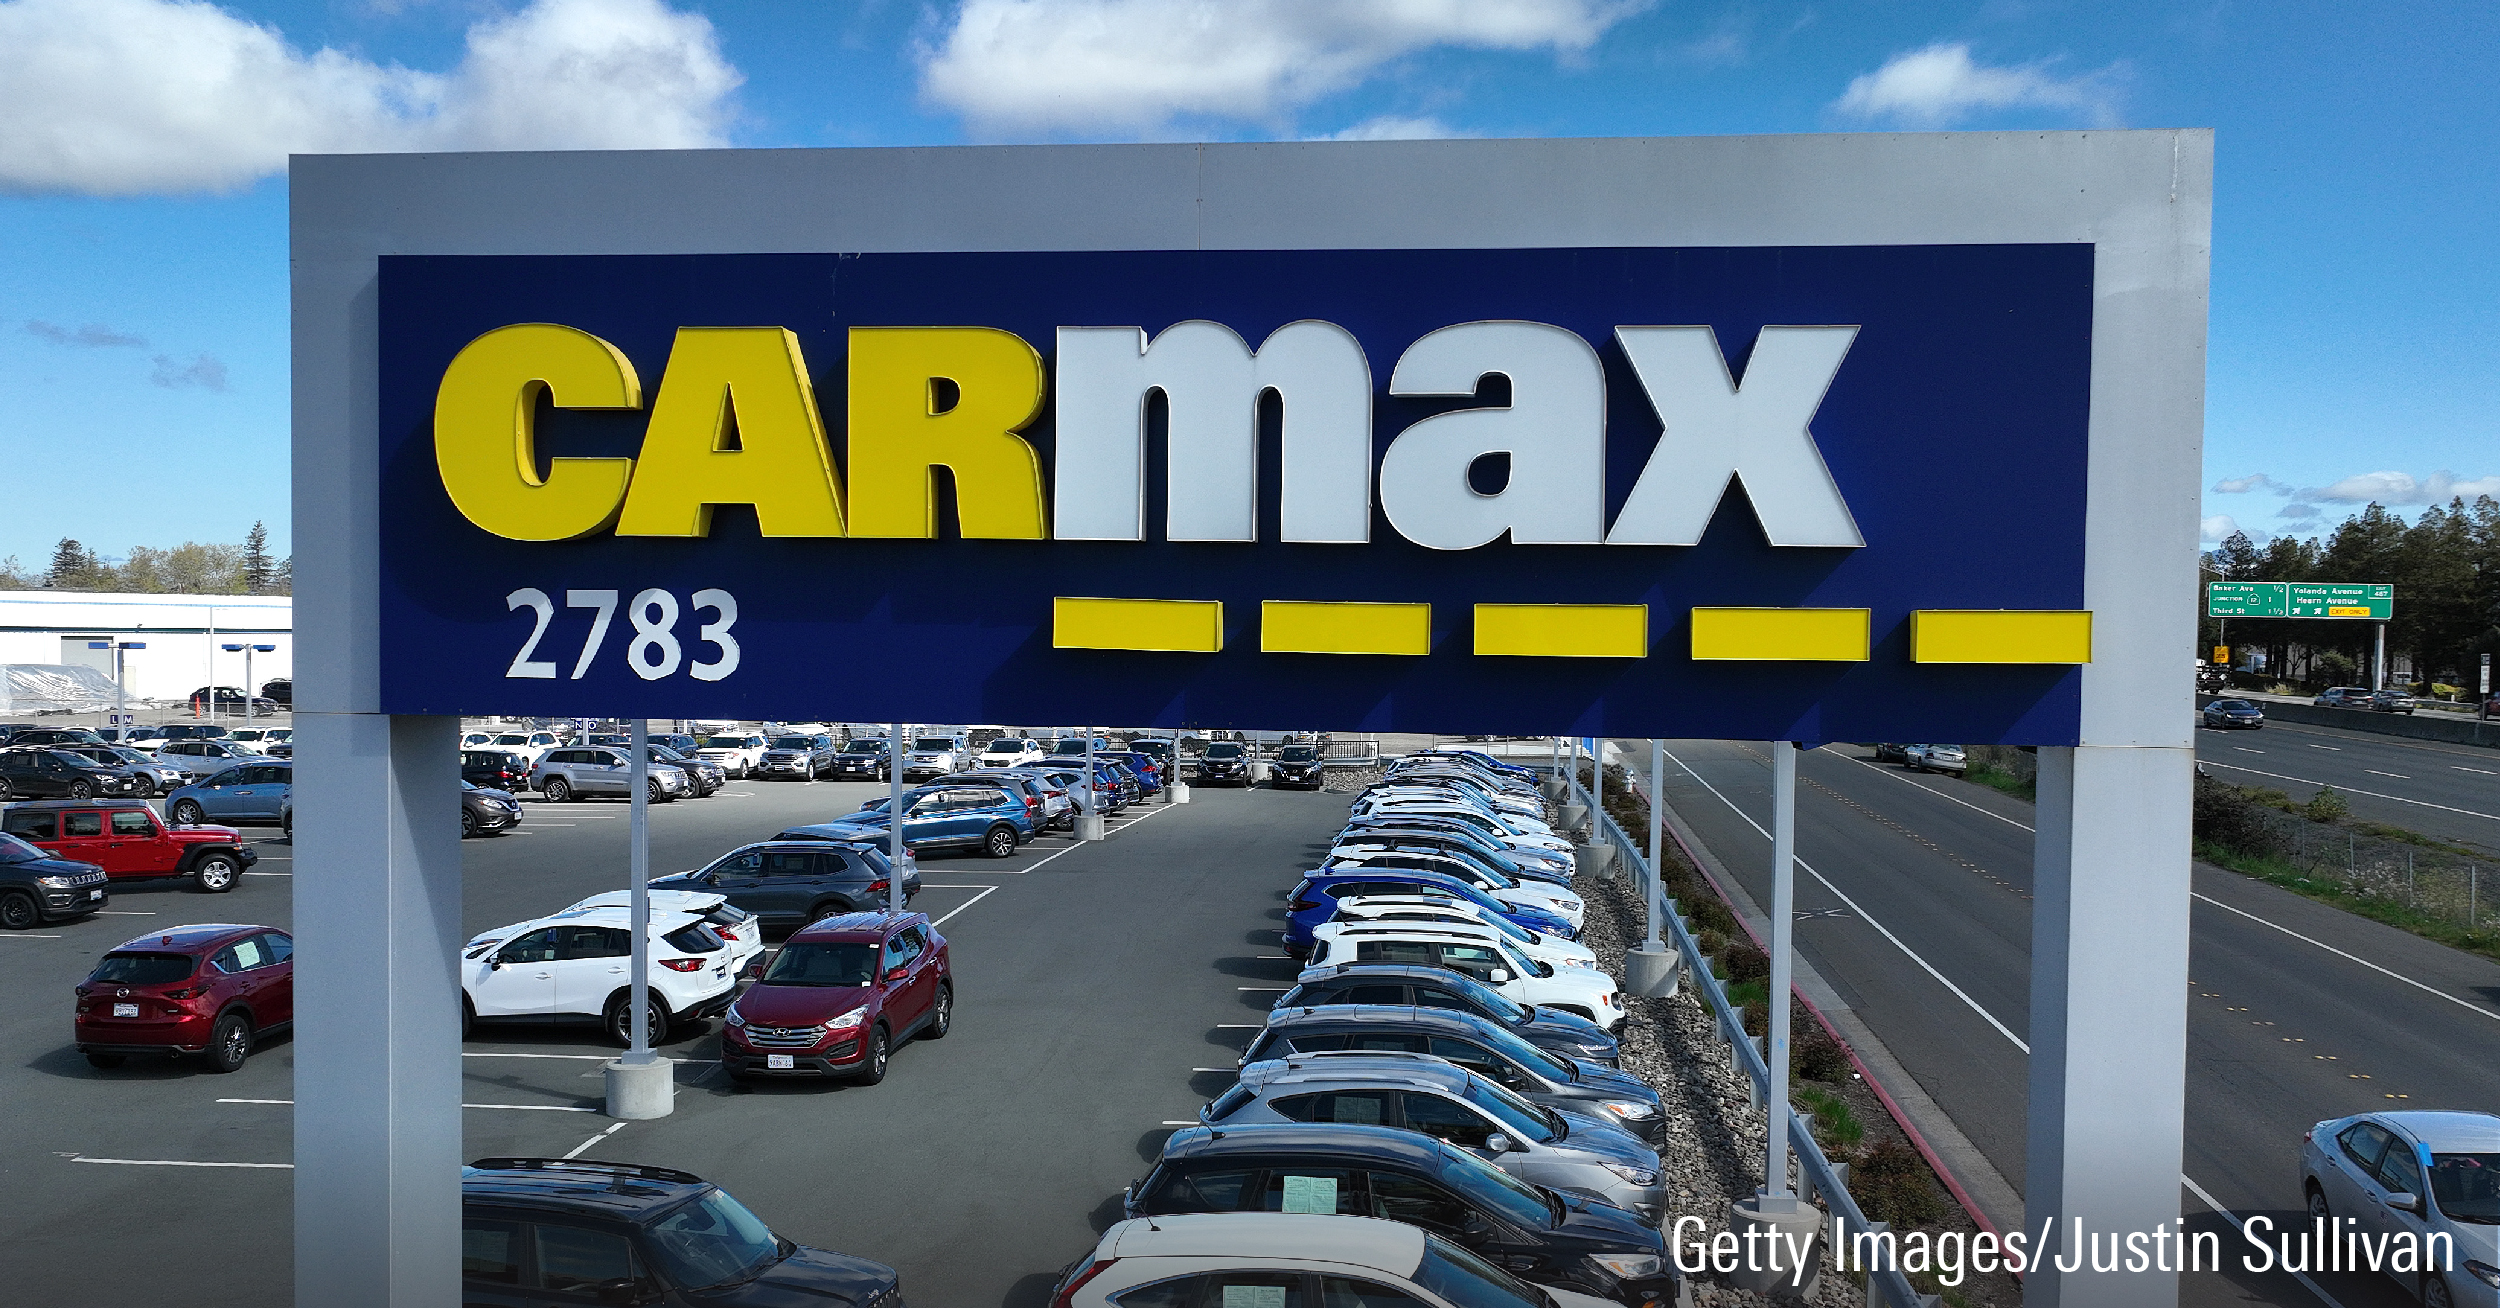 In an aerial view, cars are displayed on the sales lot at a CarMax dealership on April 11, 2023 in Santa Rosa, California.